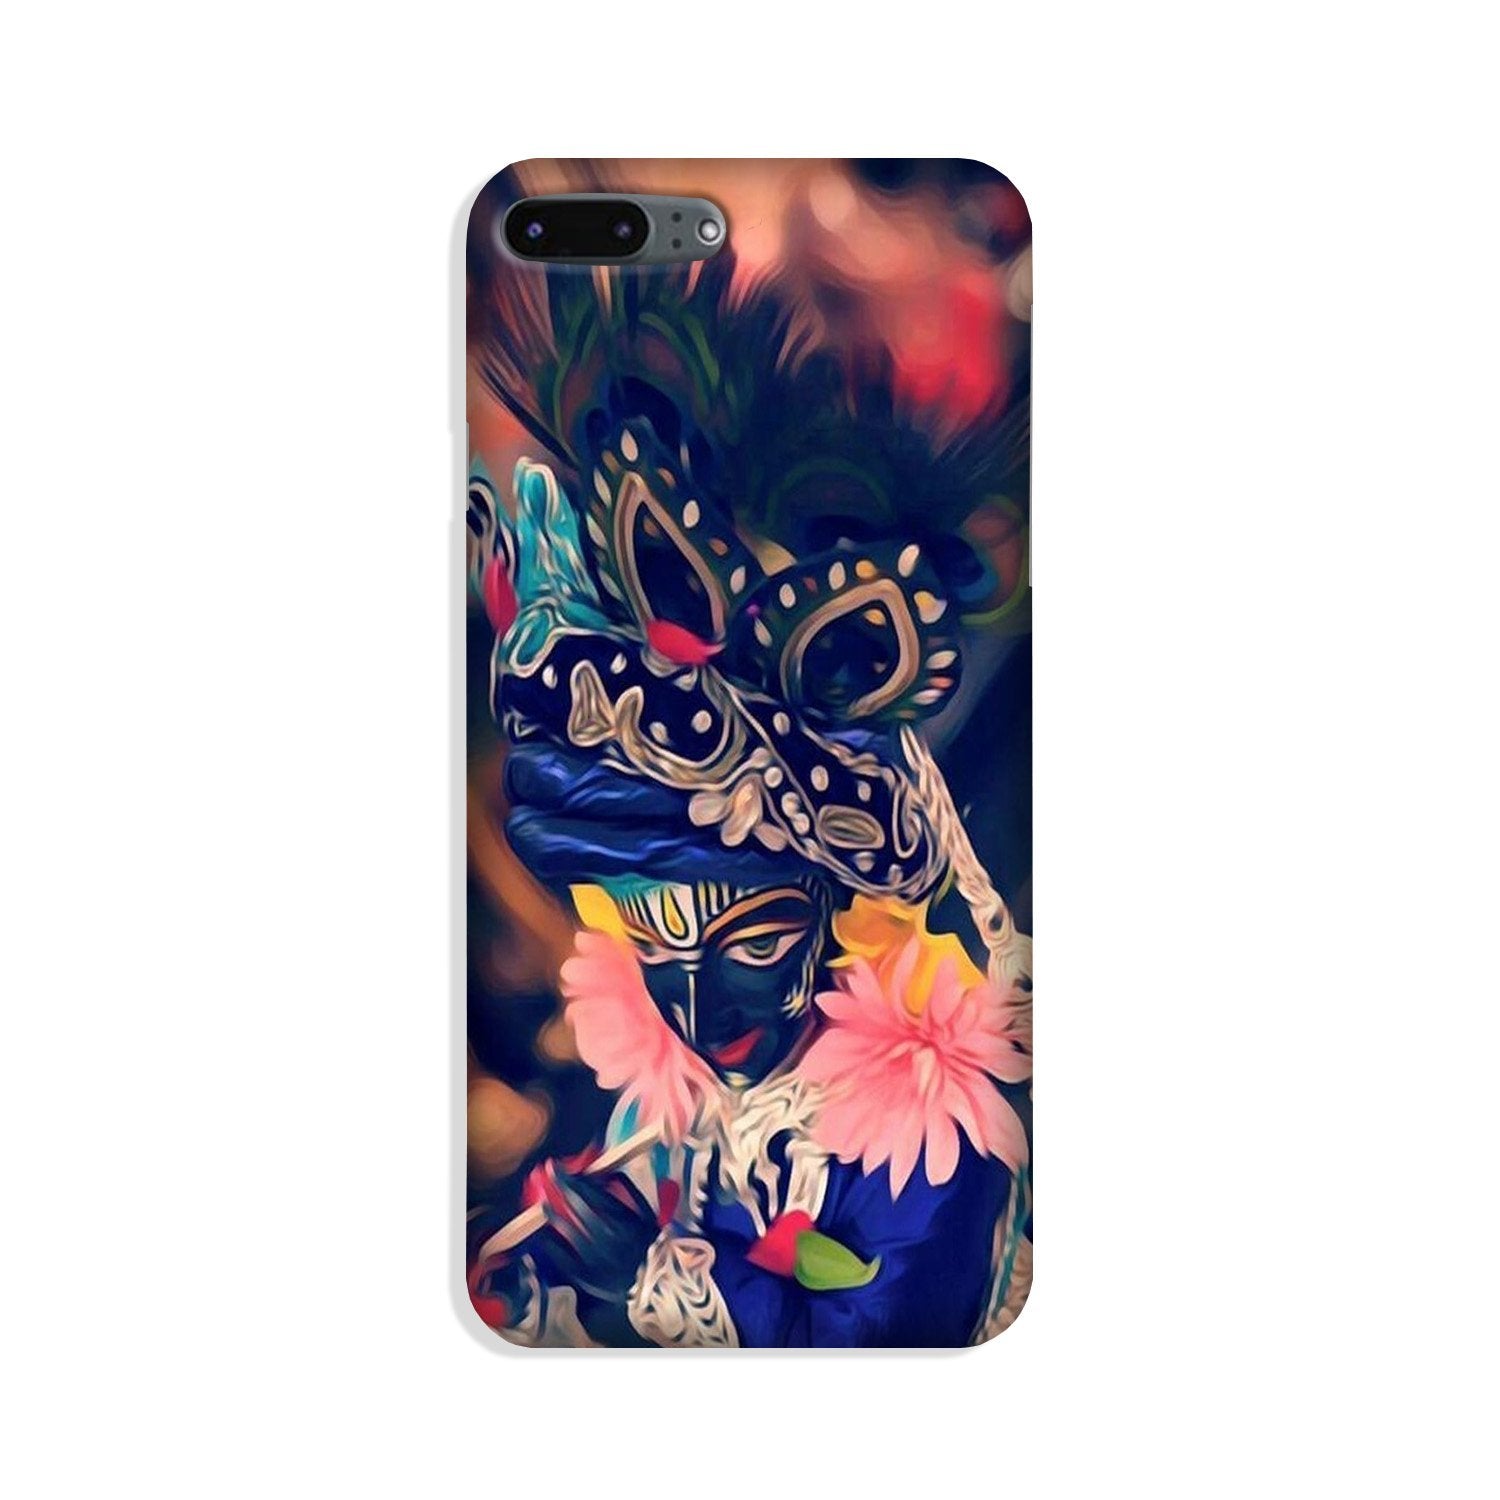 Lord Krishna Case for iPhone 8 Plus